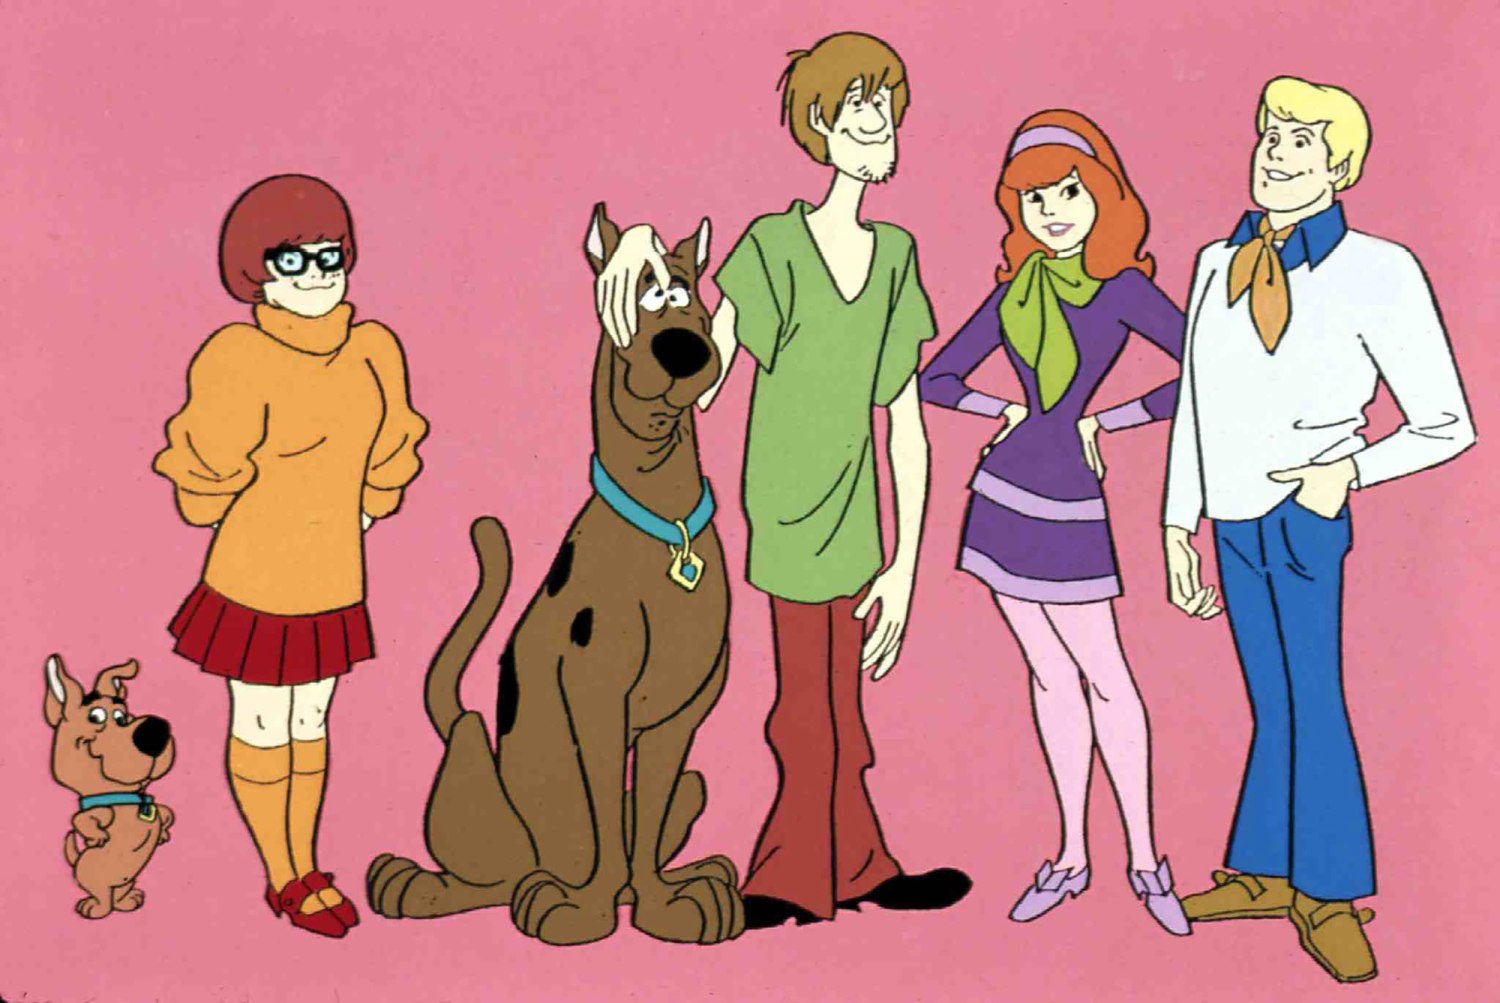 Daphne & Velma: Scooby-Doo Mystery Gang members get their own movie